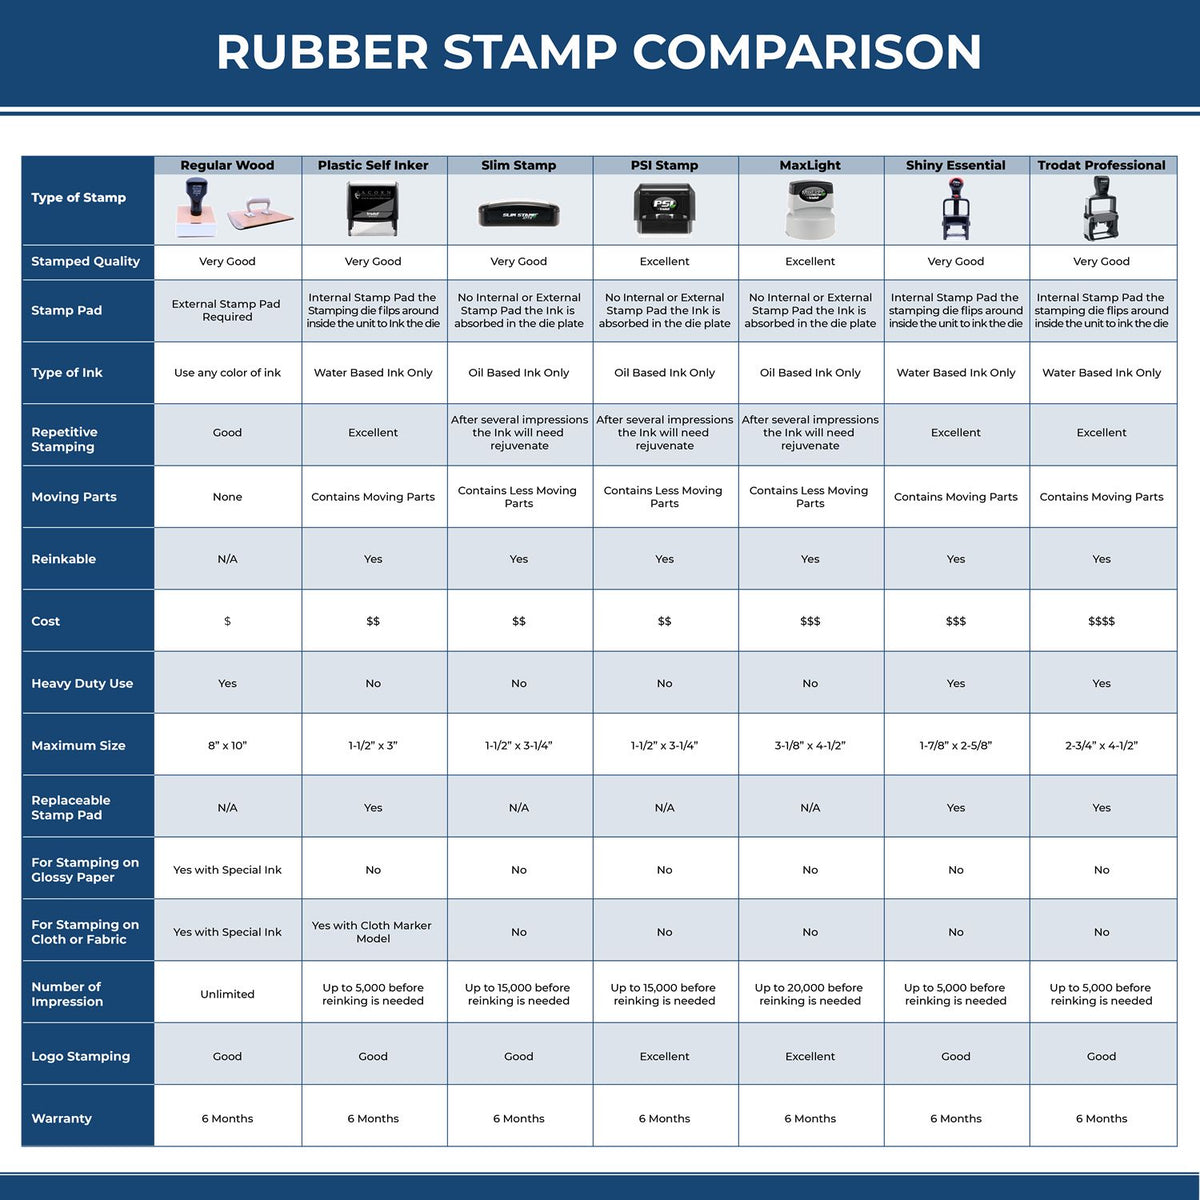 A comparison chart for the different types of mount models available for the Arkansas Professional Engineer Seal Stamp.